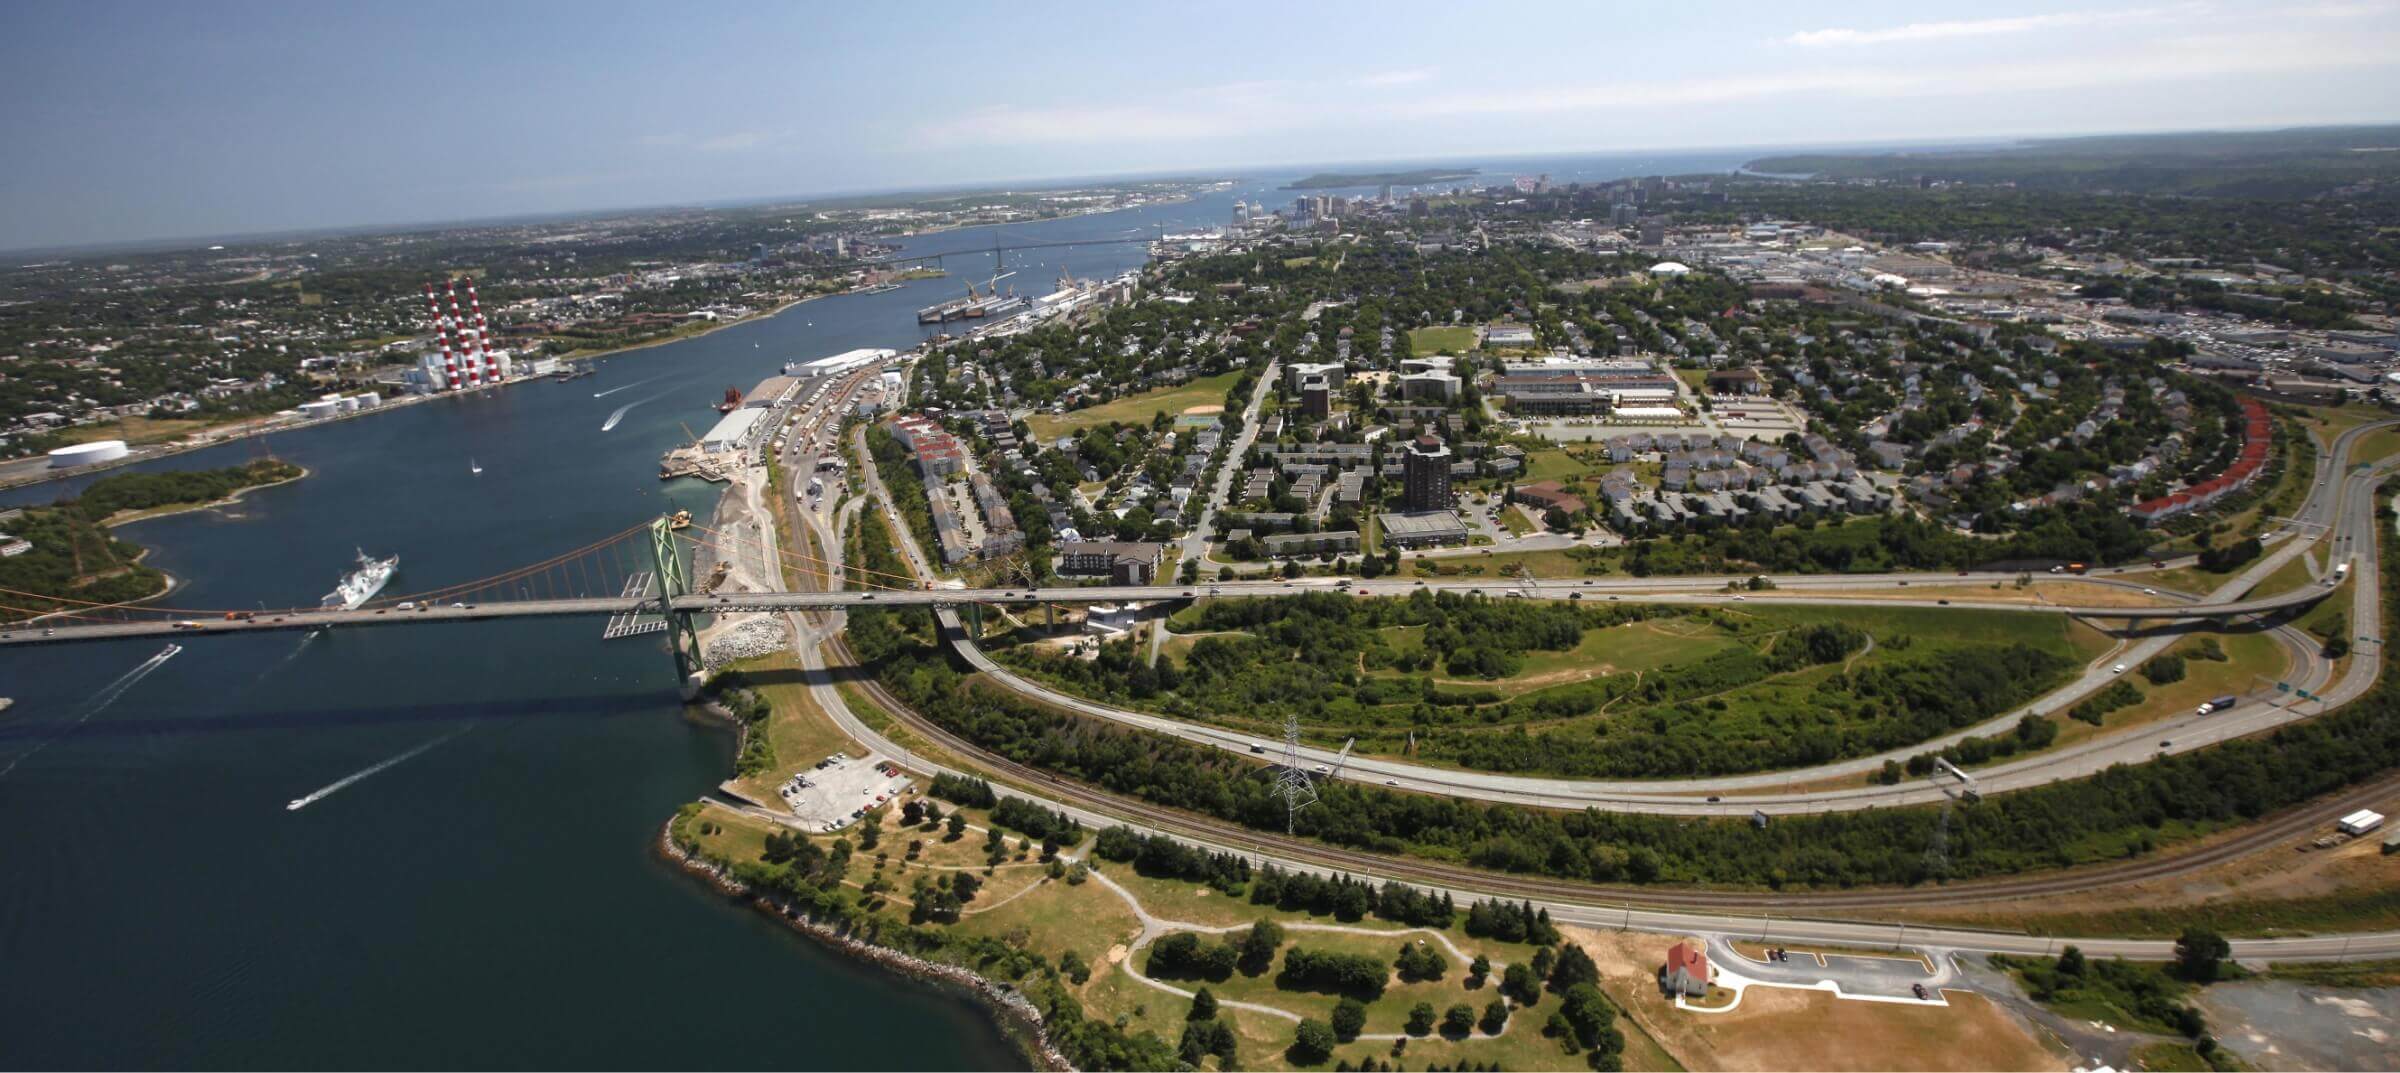 Aerial of the MacKay Bridge, Bedford Basin, the former Africville lands and Africville Park, with the narrows and Tuft's Cove seen further in the background.